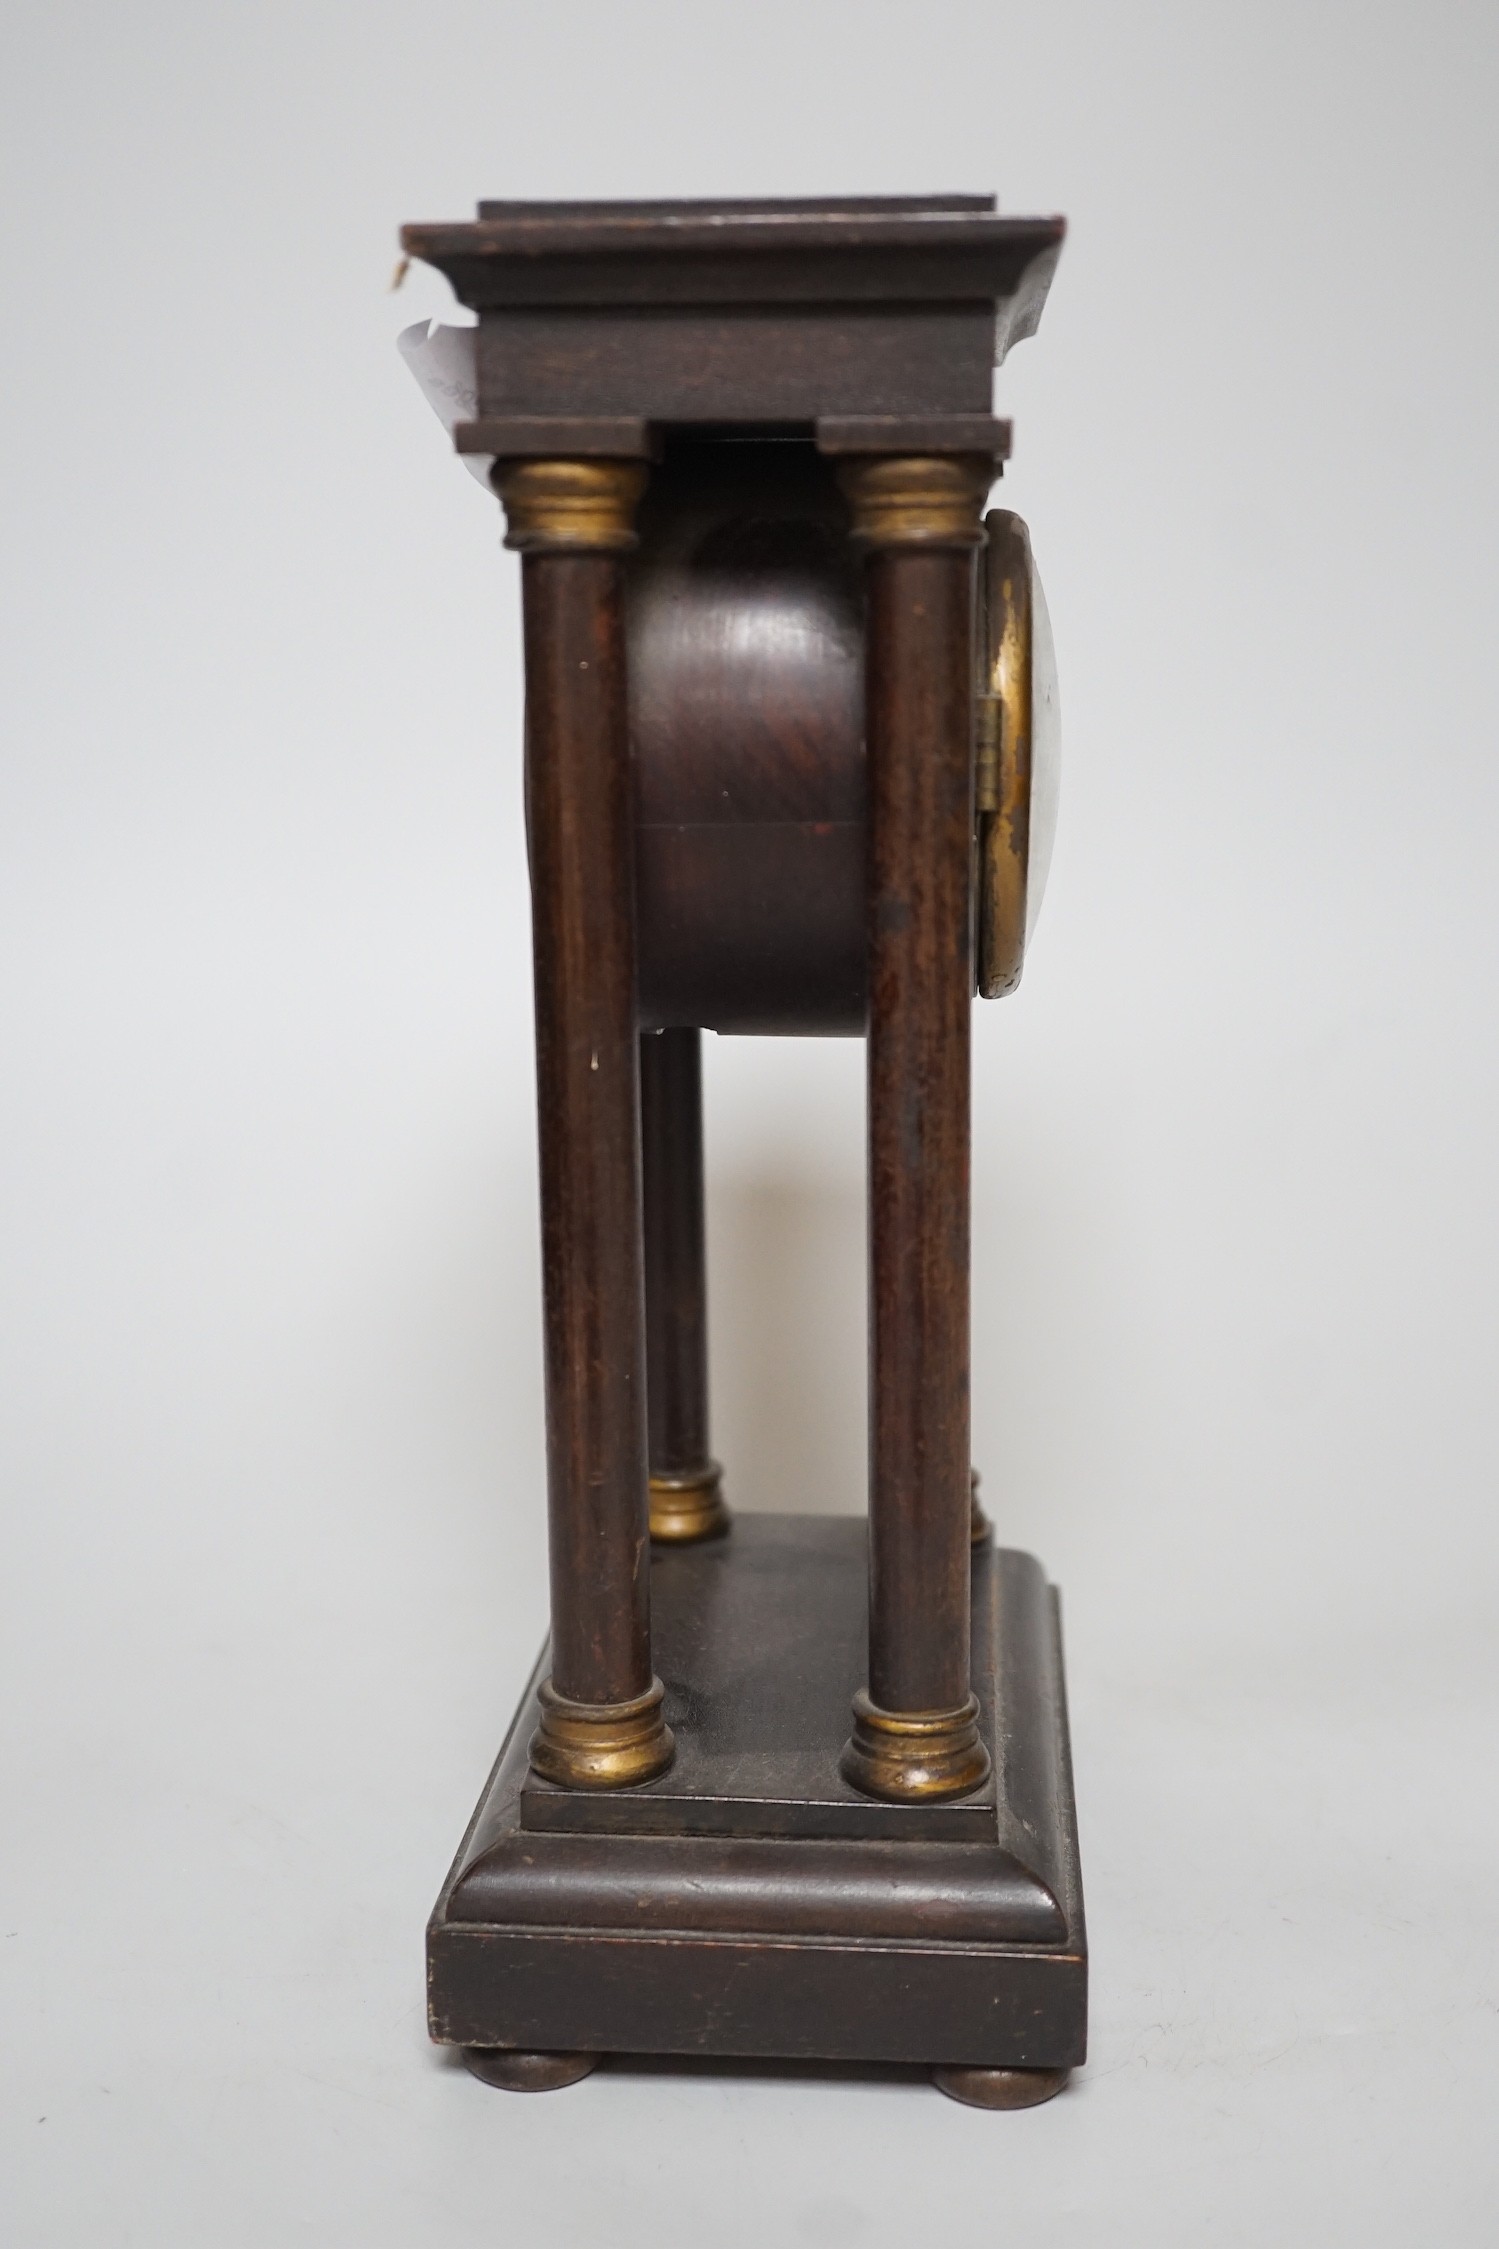 An Edwardian Portico-type mantel clock, 27cms high - Image 3 of 5